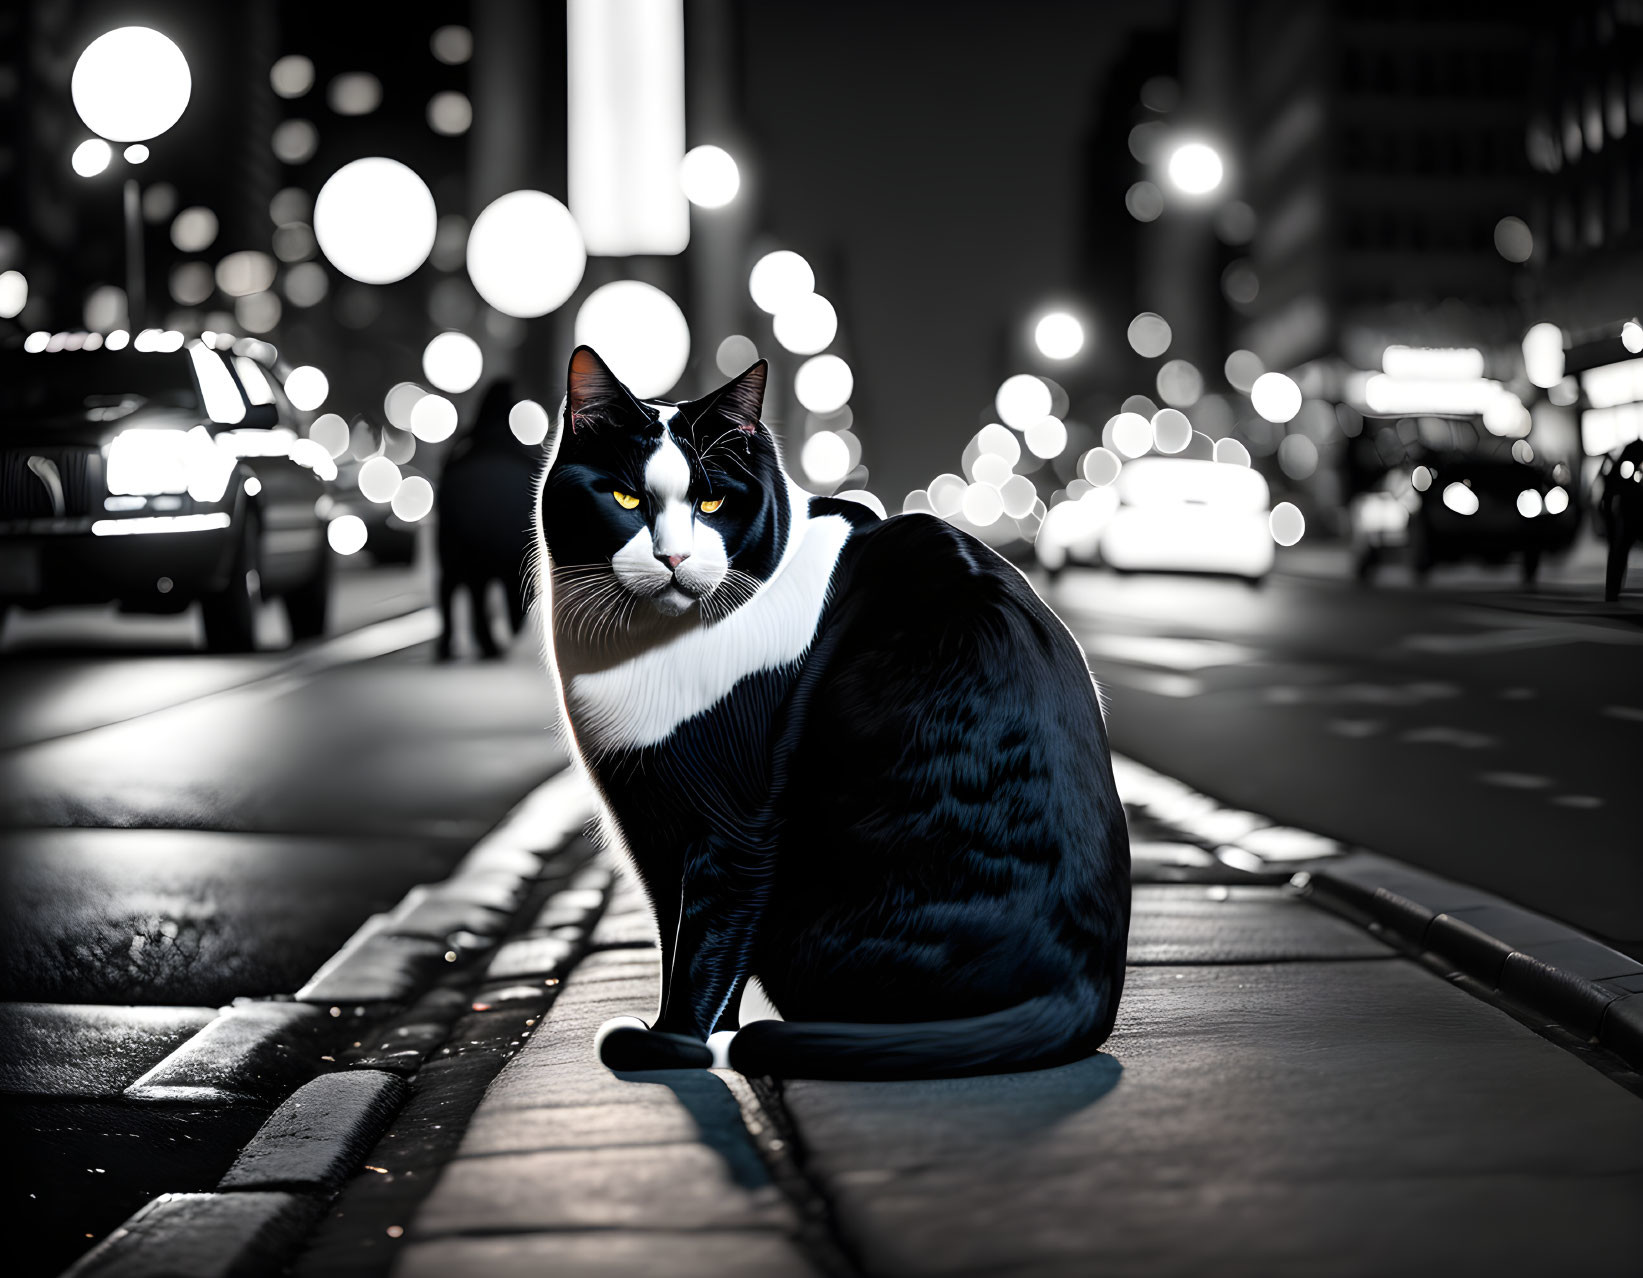 Black and white cat with striking eyes on city sidewalk at night